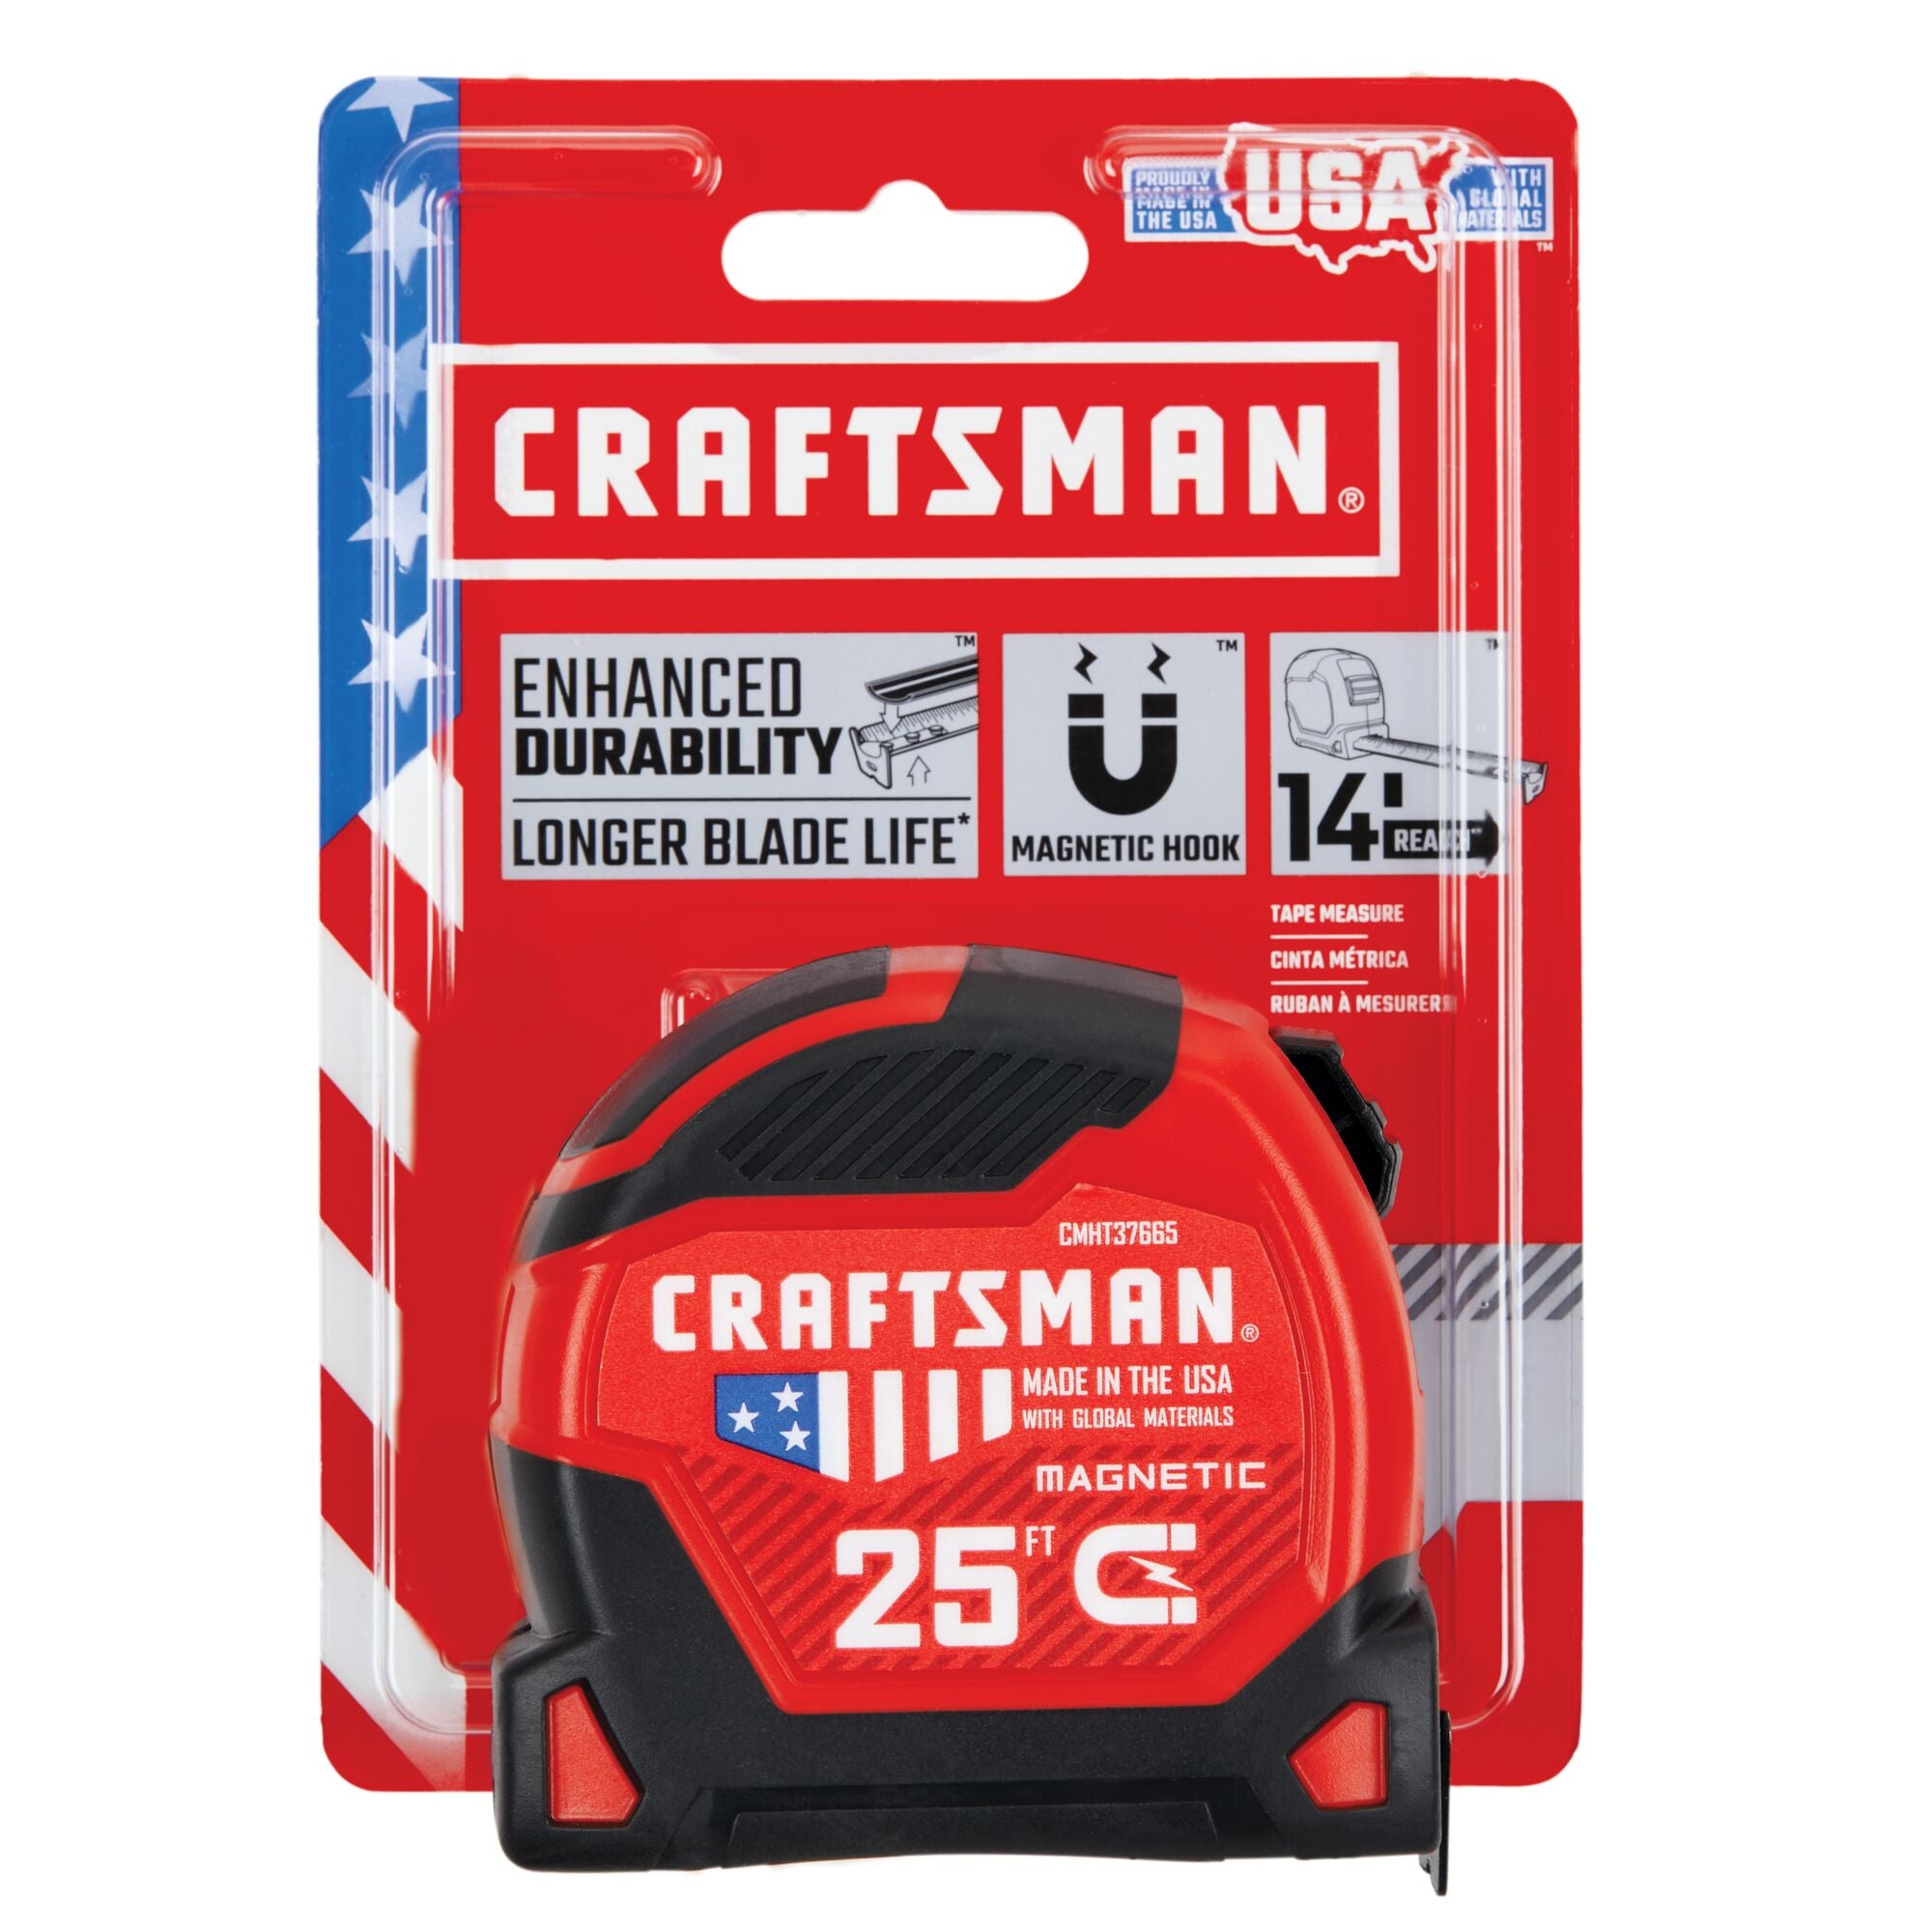 CRAFTSMAN CHROME 16-ft Tape Measure in the Tape Measures department at